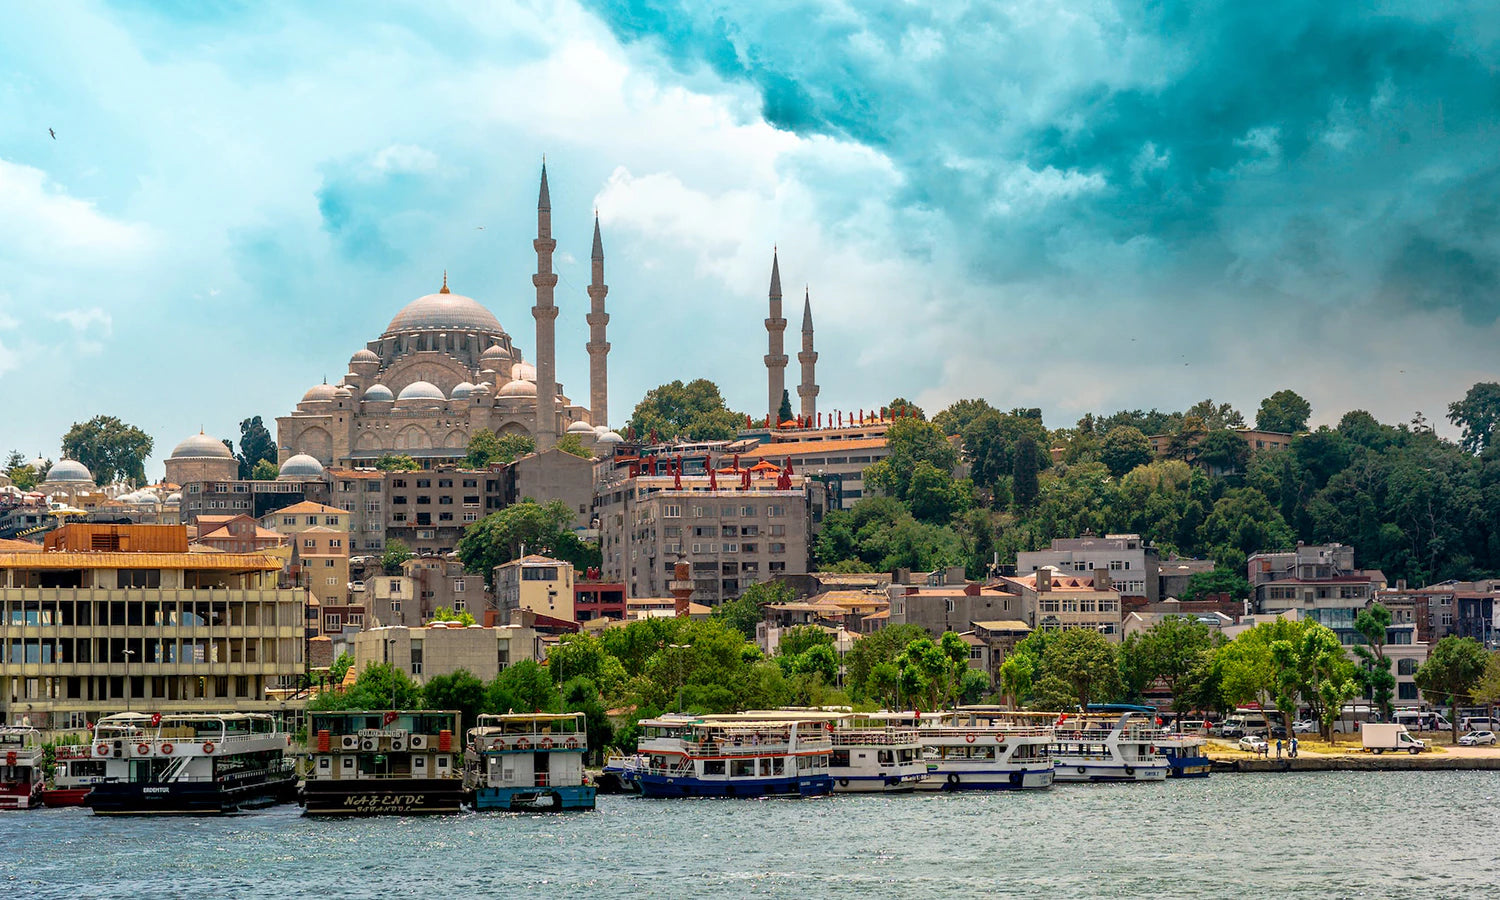 Istanbul - City of Two Continents